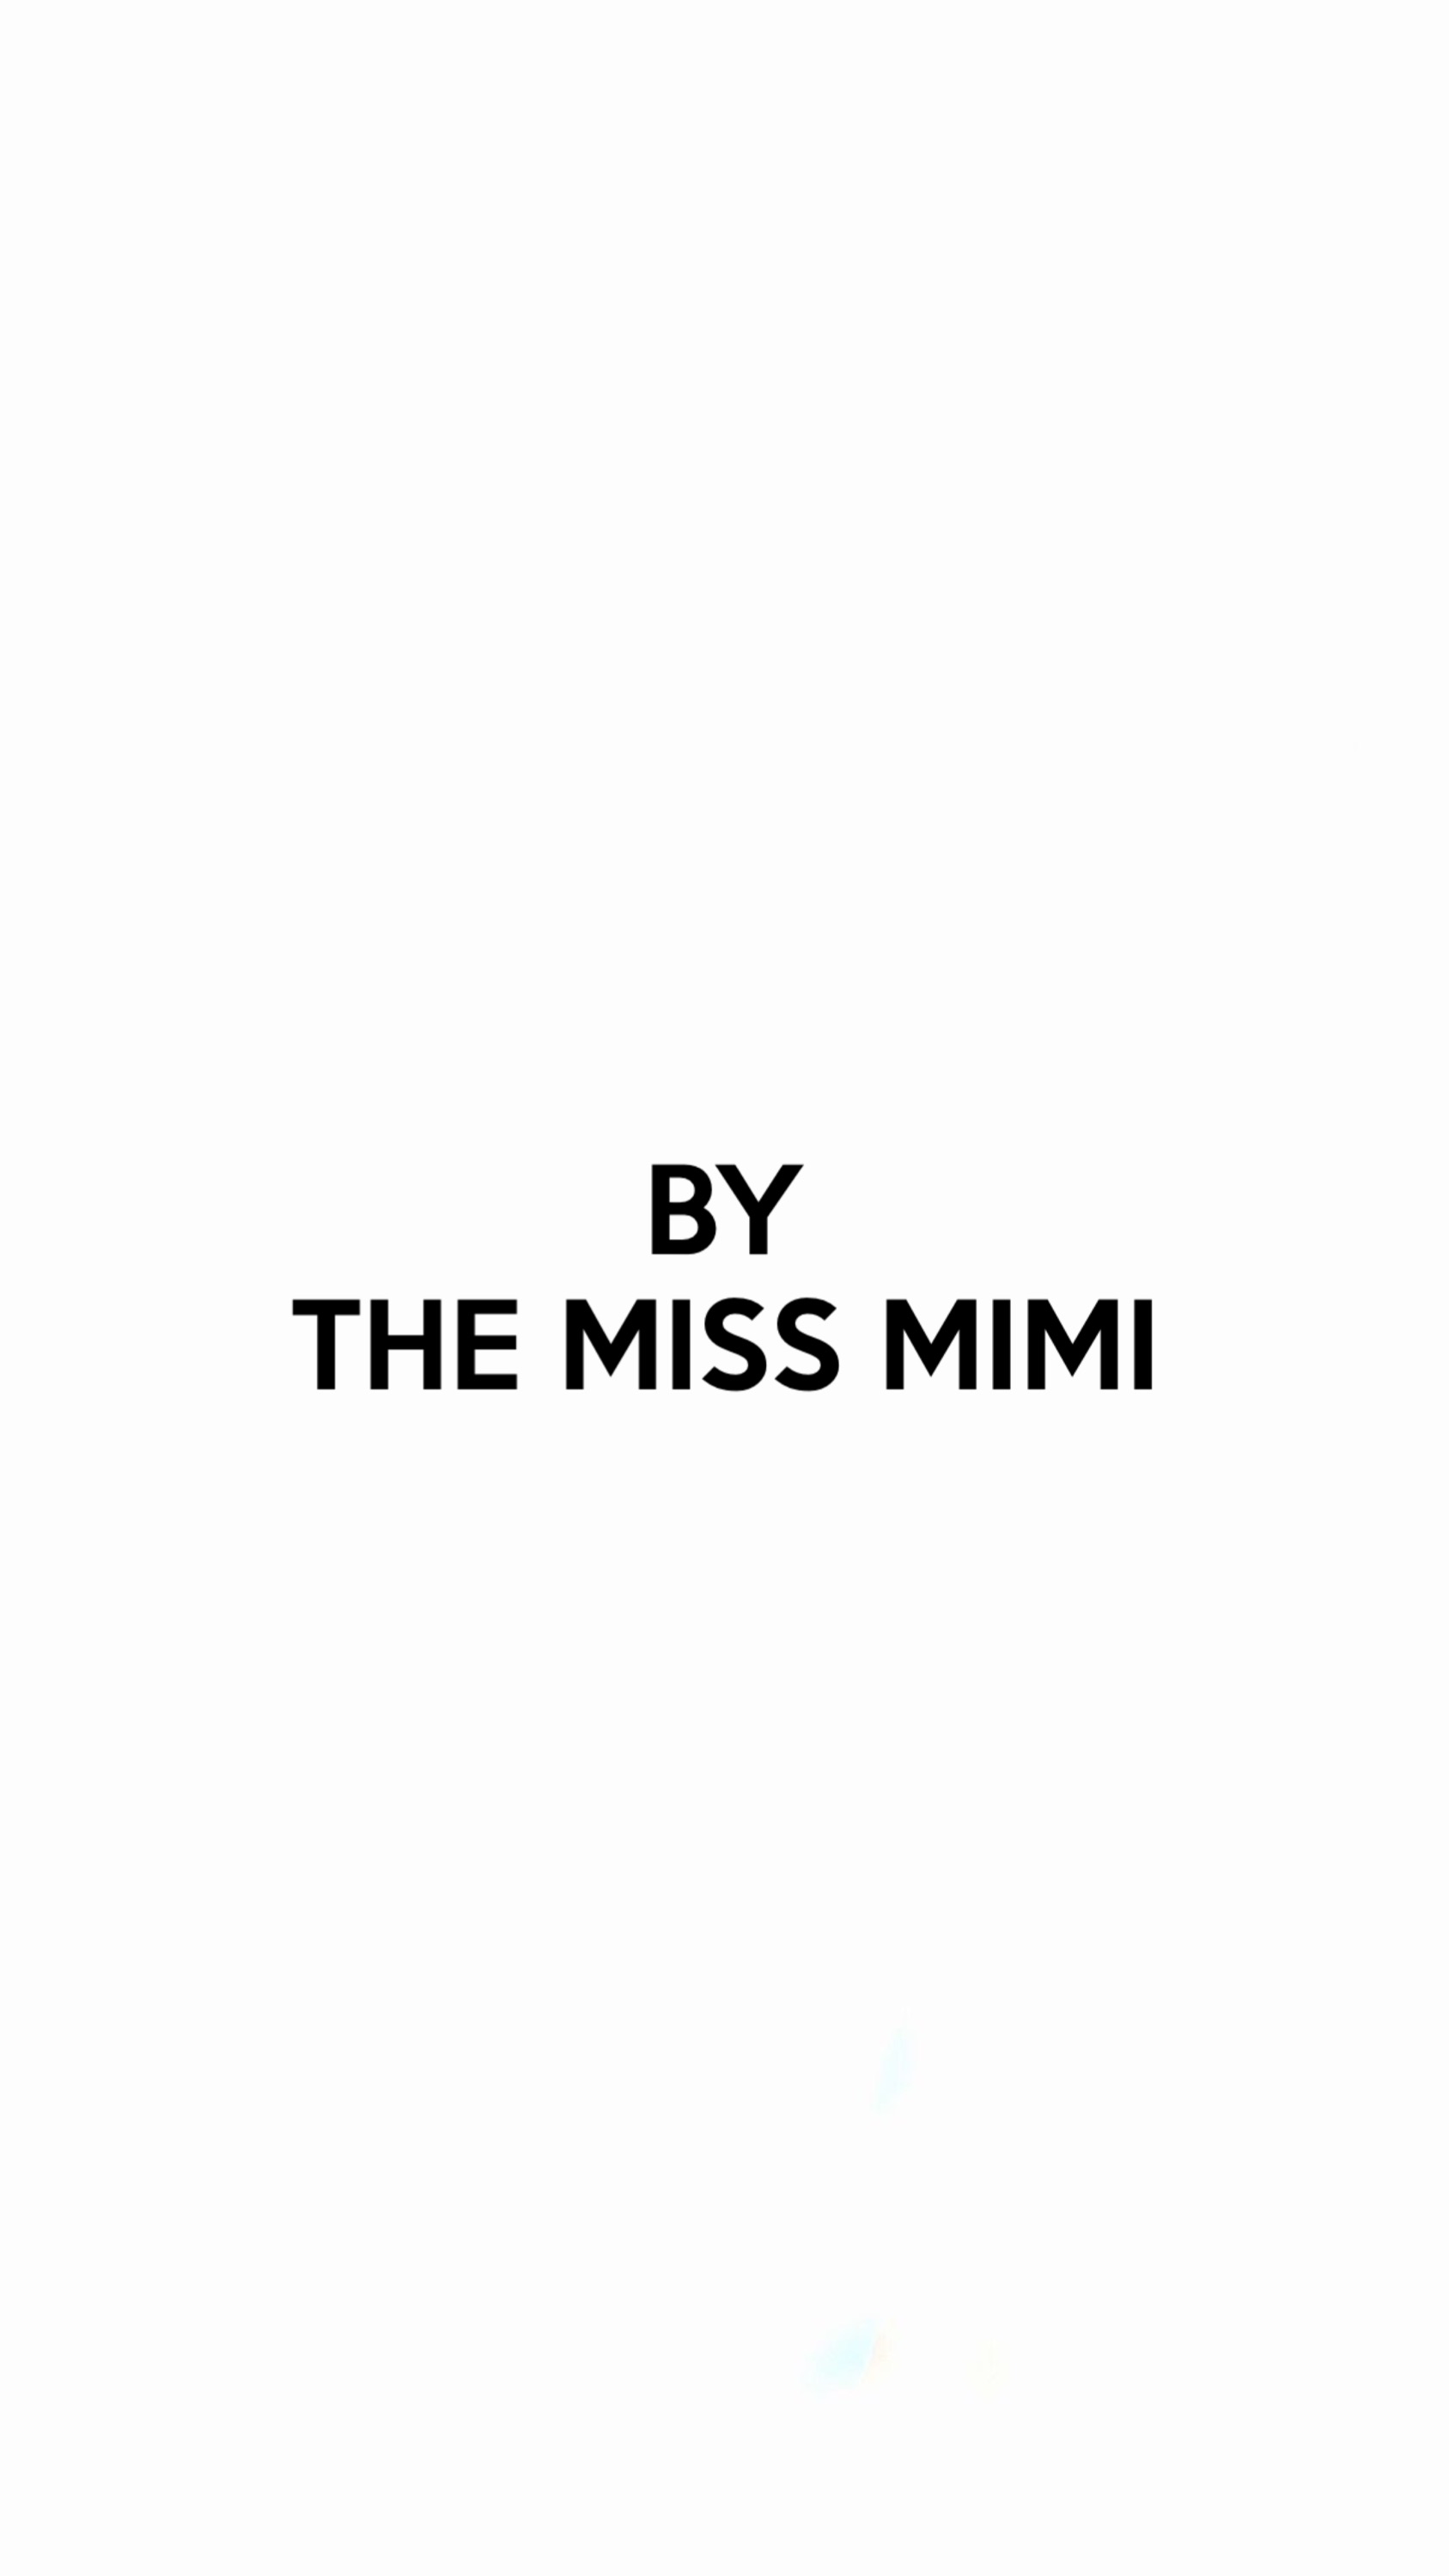 BY THE MISS MIMI